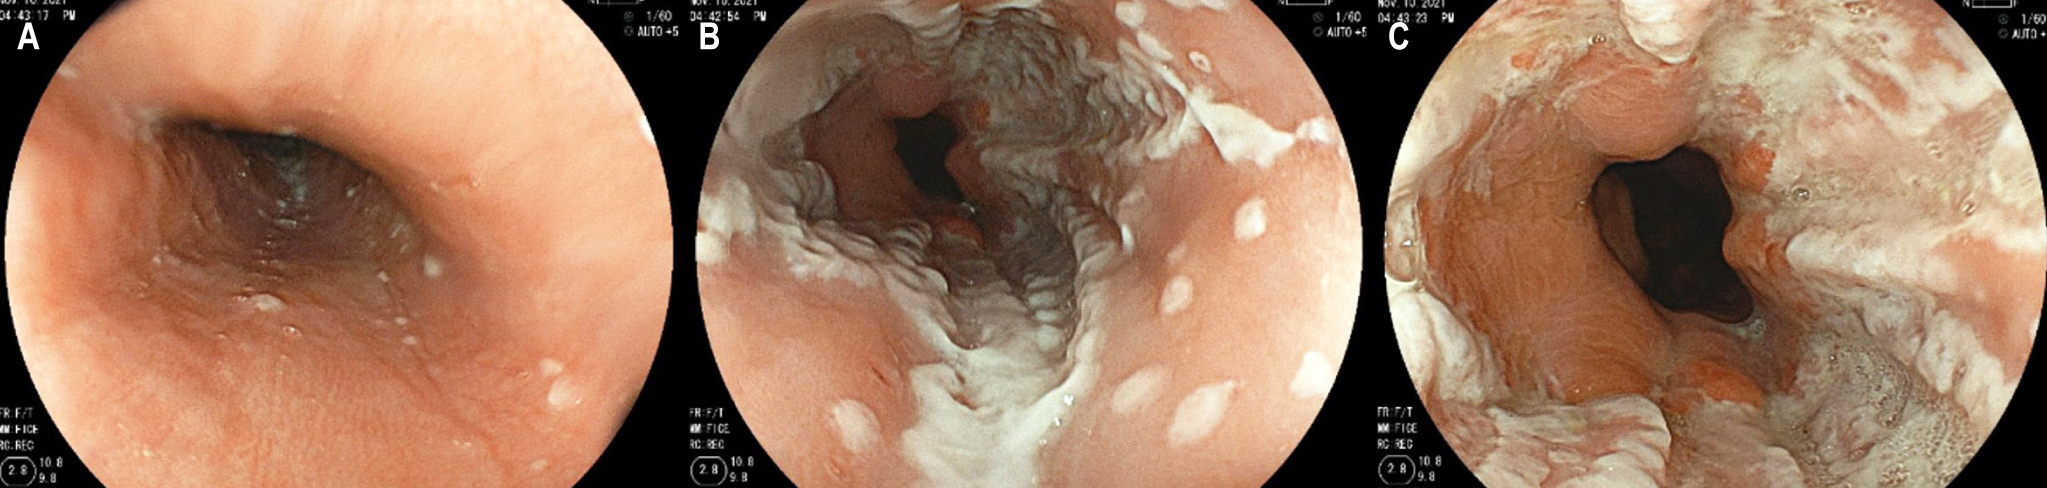 Figure 1. Upper endoscopy of the patient with herpetic esophagitis, lesions in different stages of evolution, from isolated vesicles to erosions and confluent ulcers. A. Proximal esophagus. B. Middle esophagus. C. Distal esophagus. Authors’ archives.